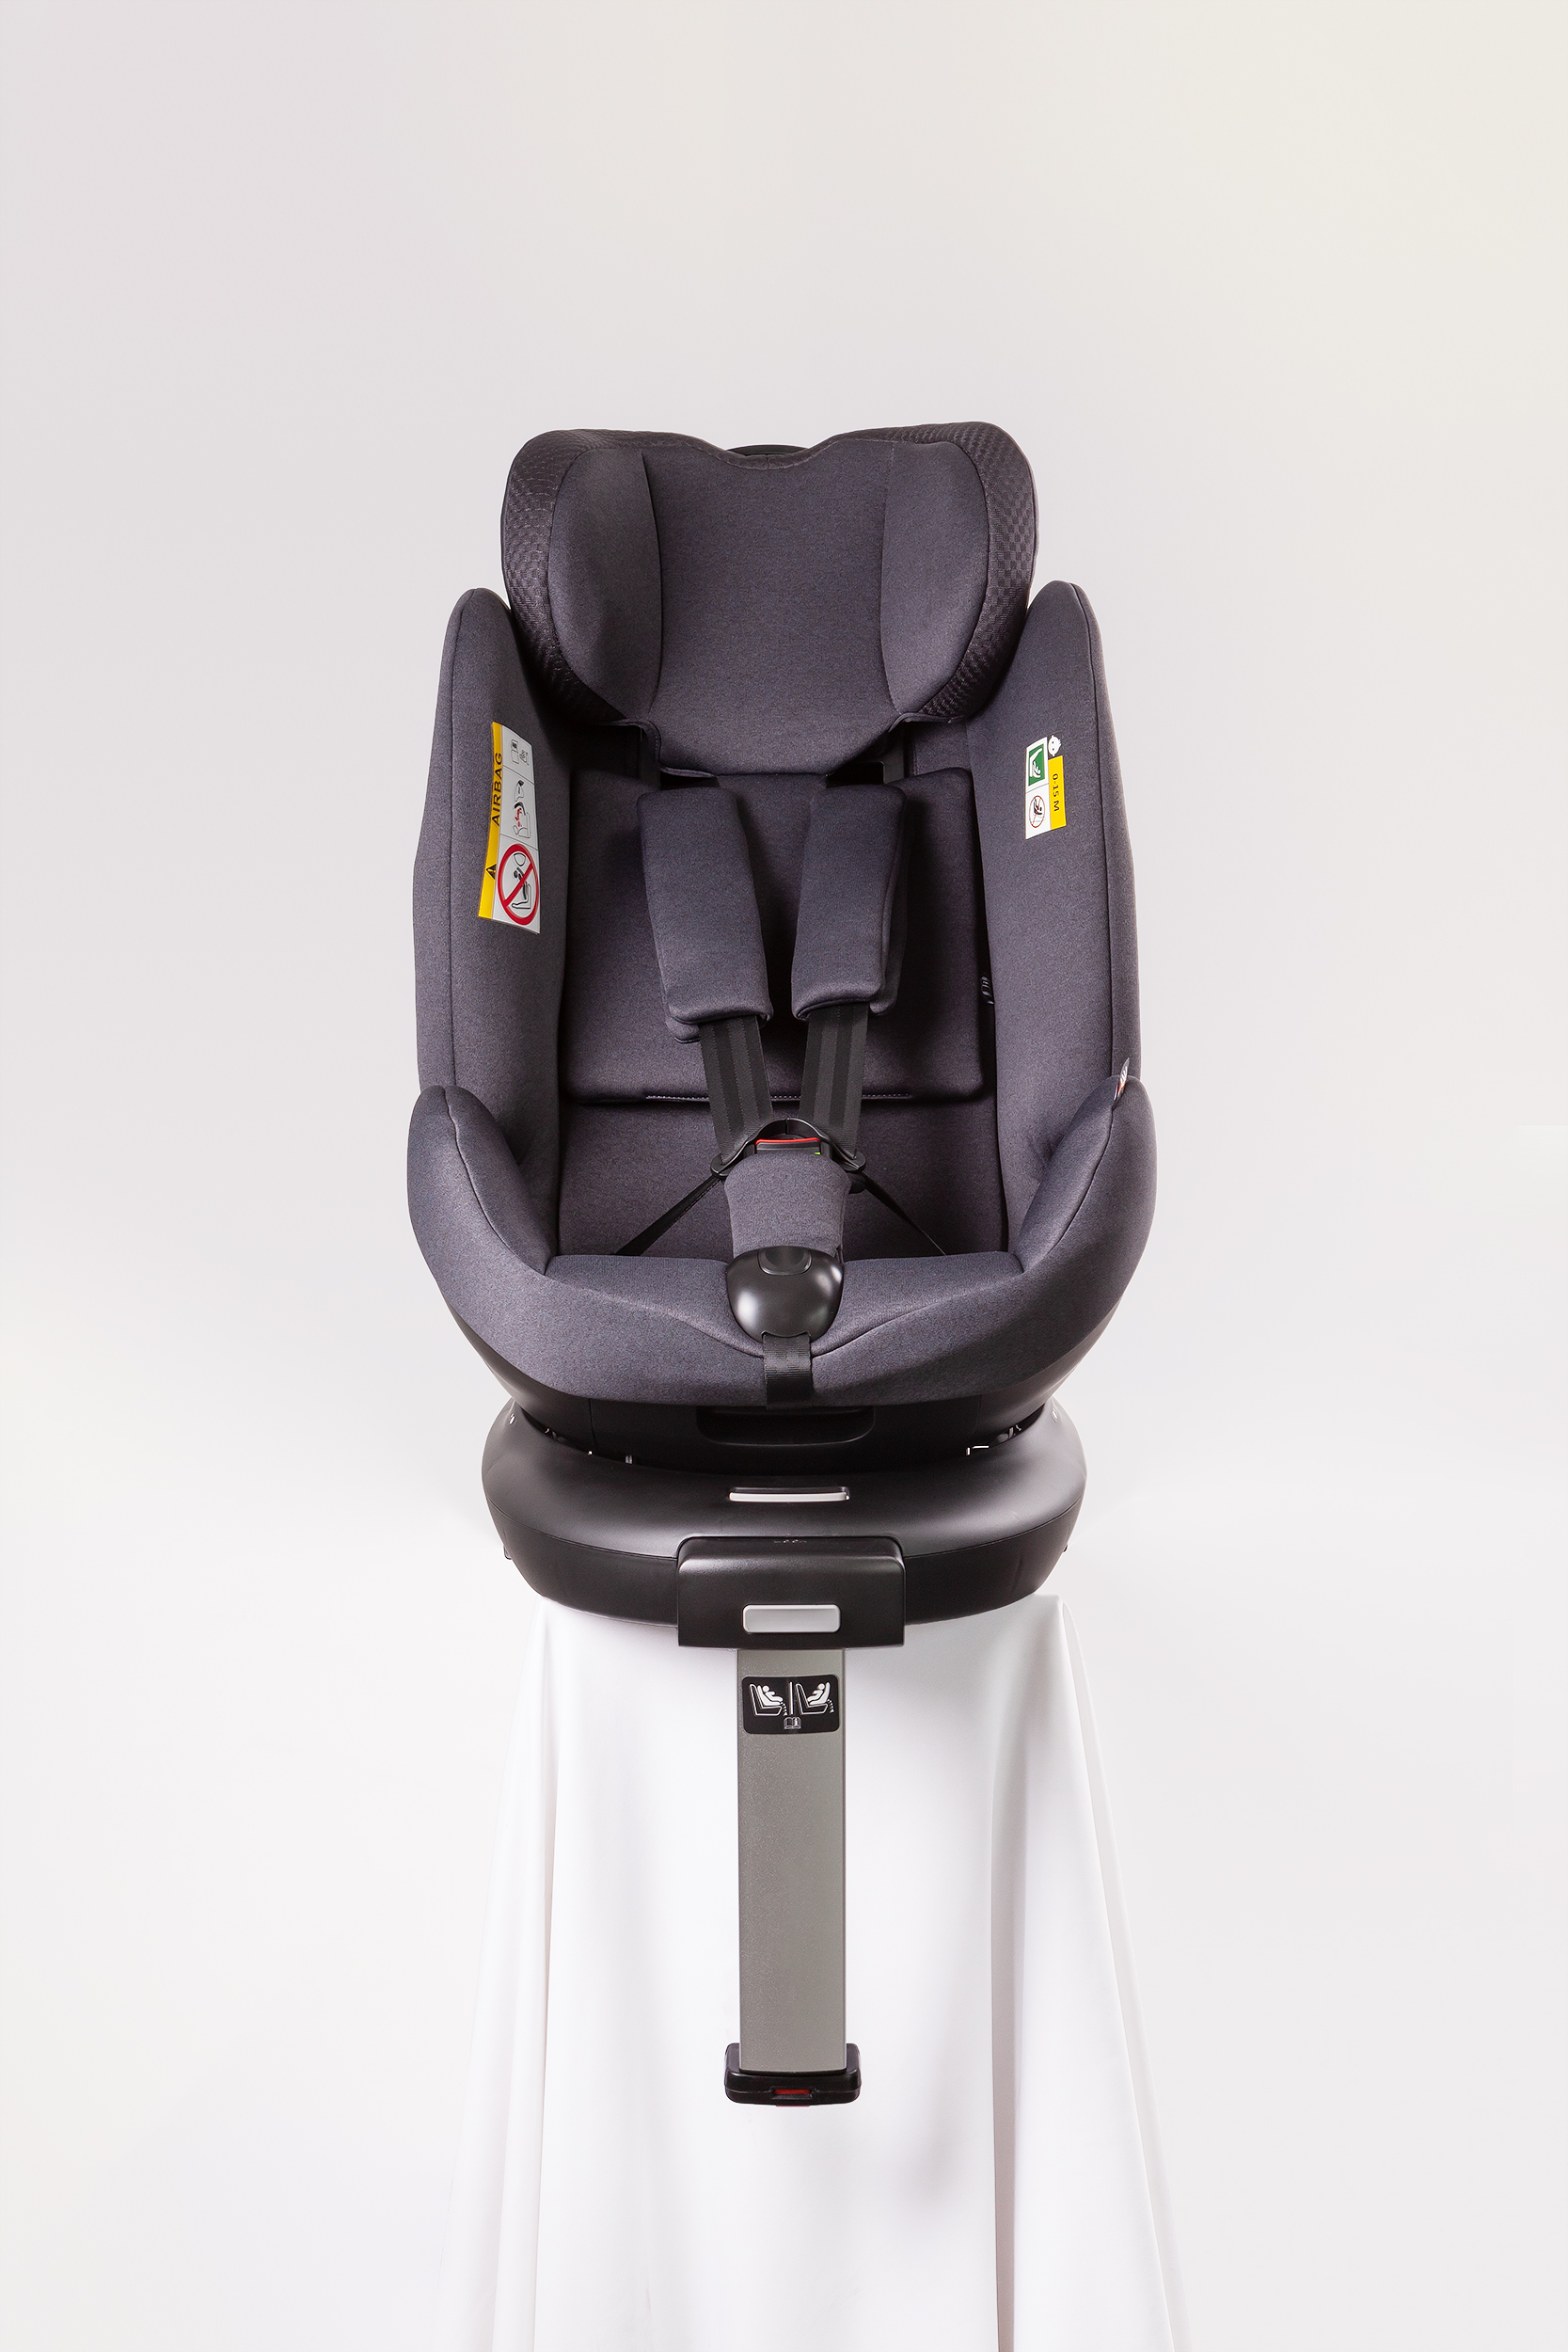 child car seat for sale the UK